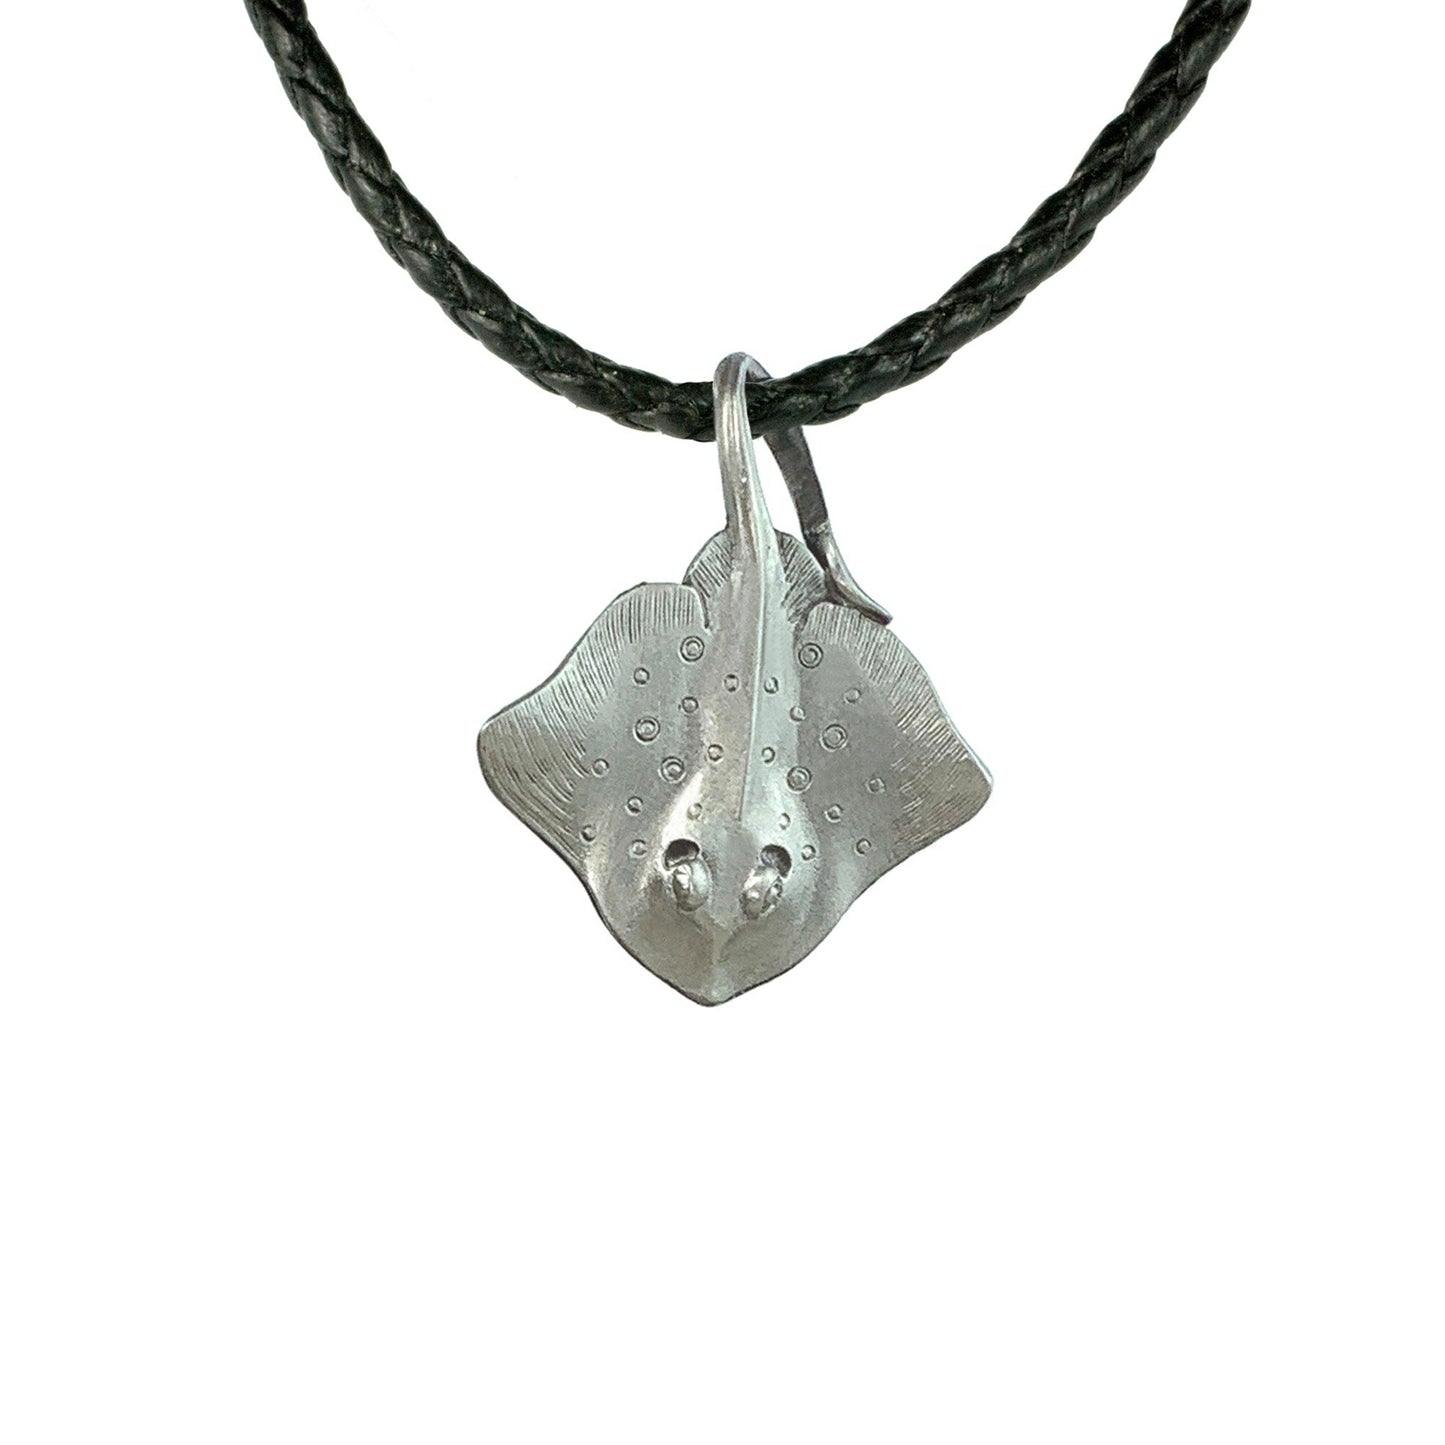 Stingray Necklace- Stingray Gift for Women and Men, Stingray Pendant, Gifts for Divers, Sea Life Jewelry - The Tool Store